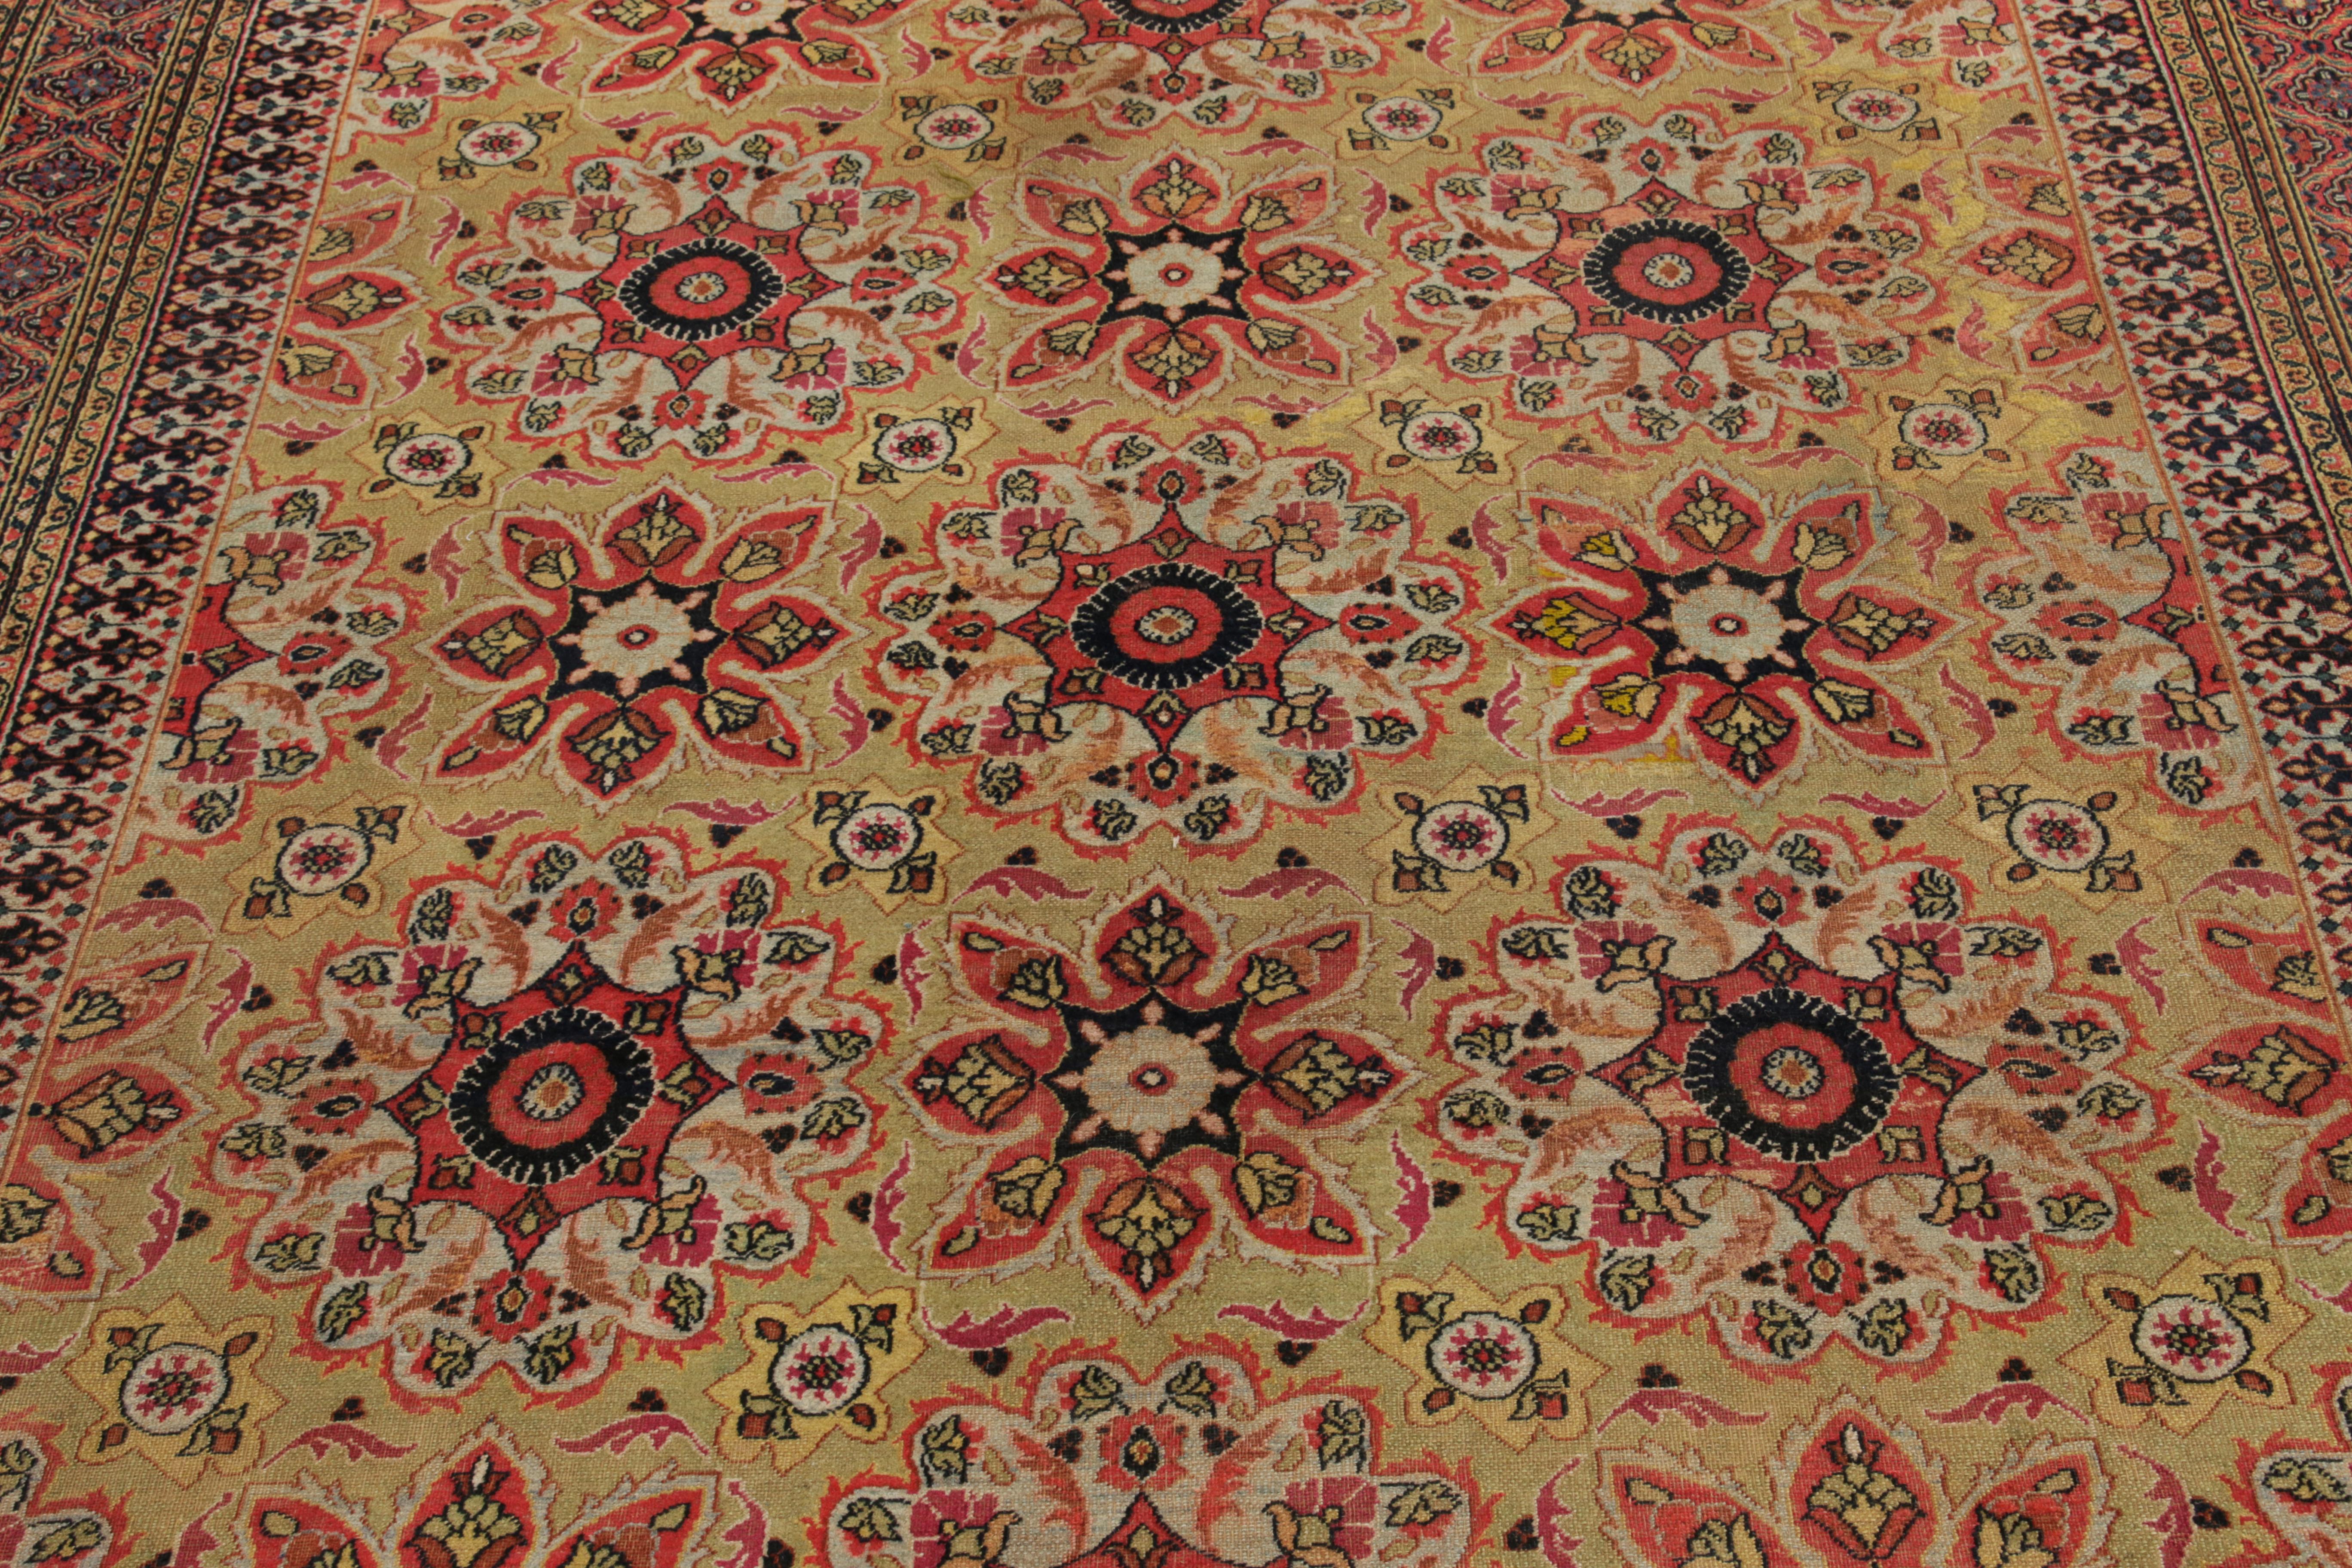 Hand-Knotted Antique Khorassan Rug in All over Red, Green Floral Pattern by Rug & Kilim For Sale